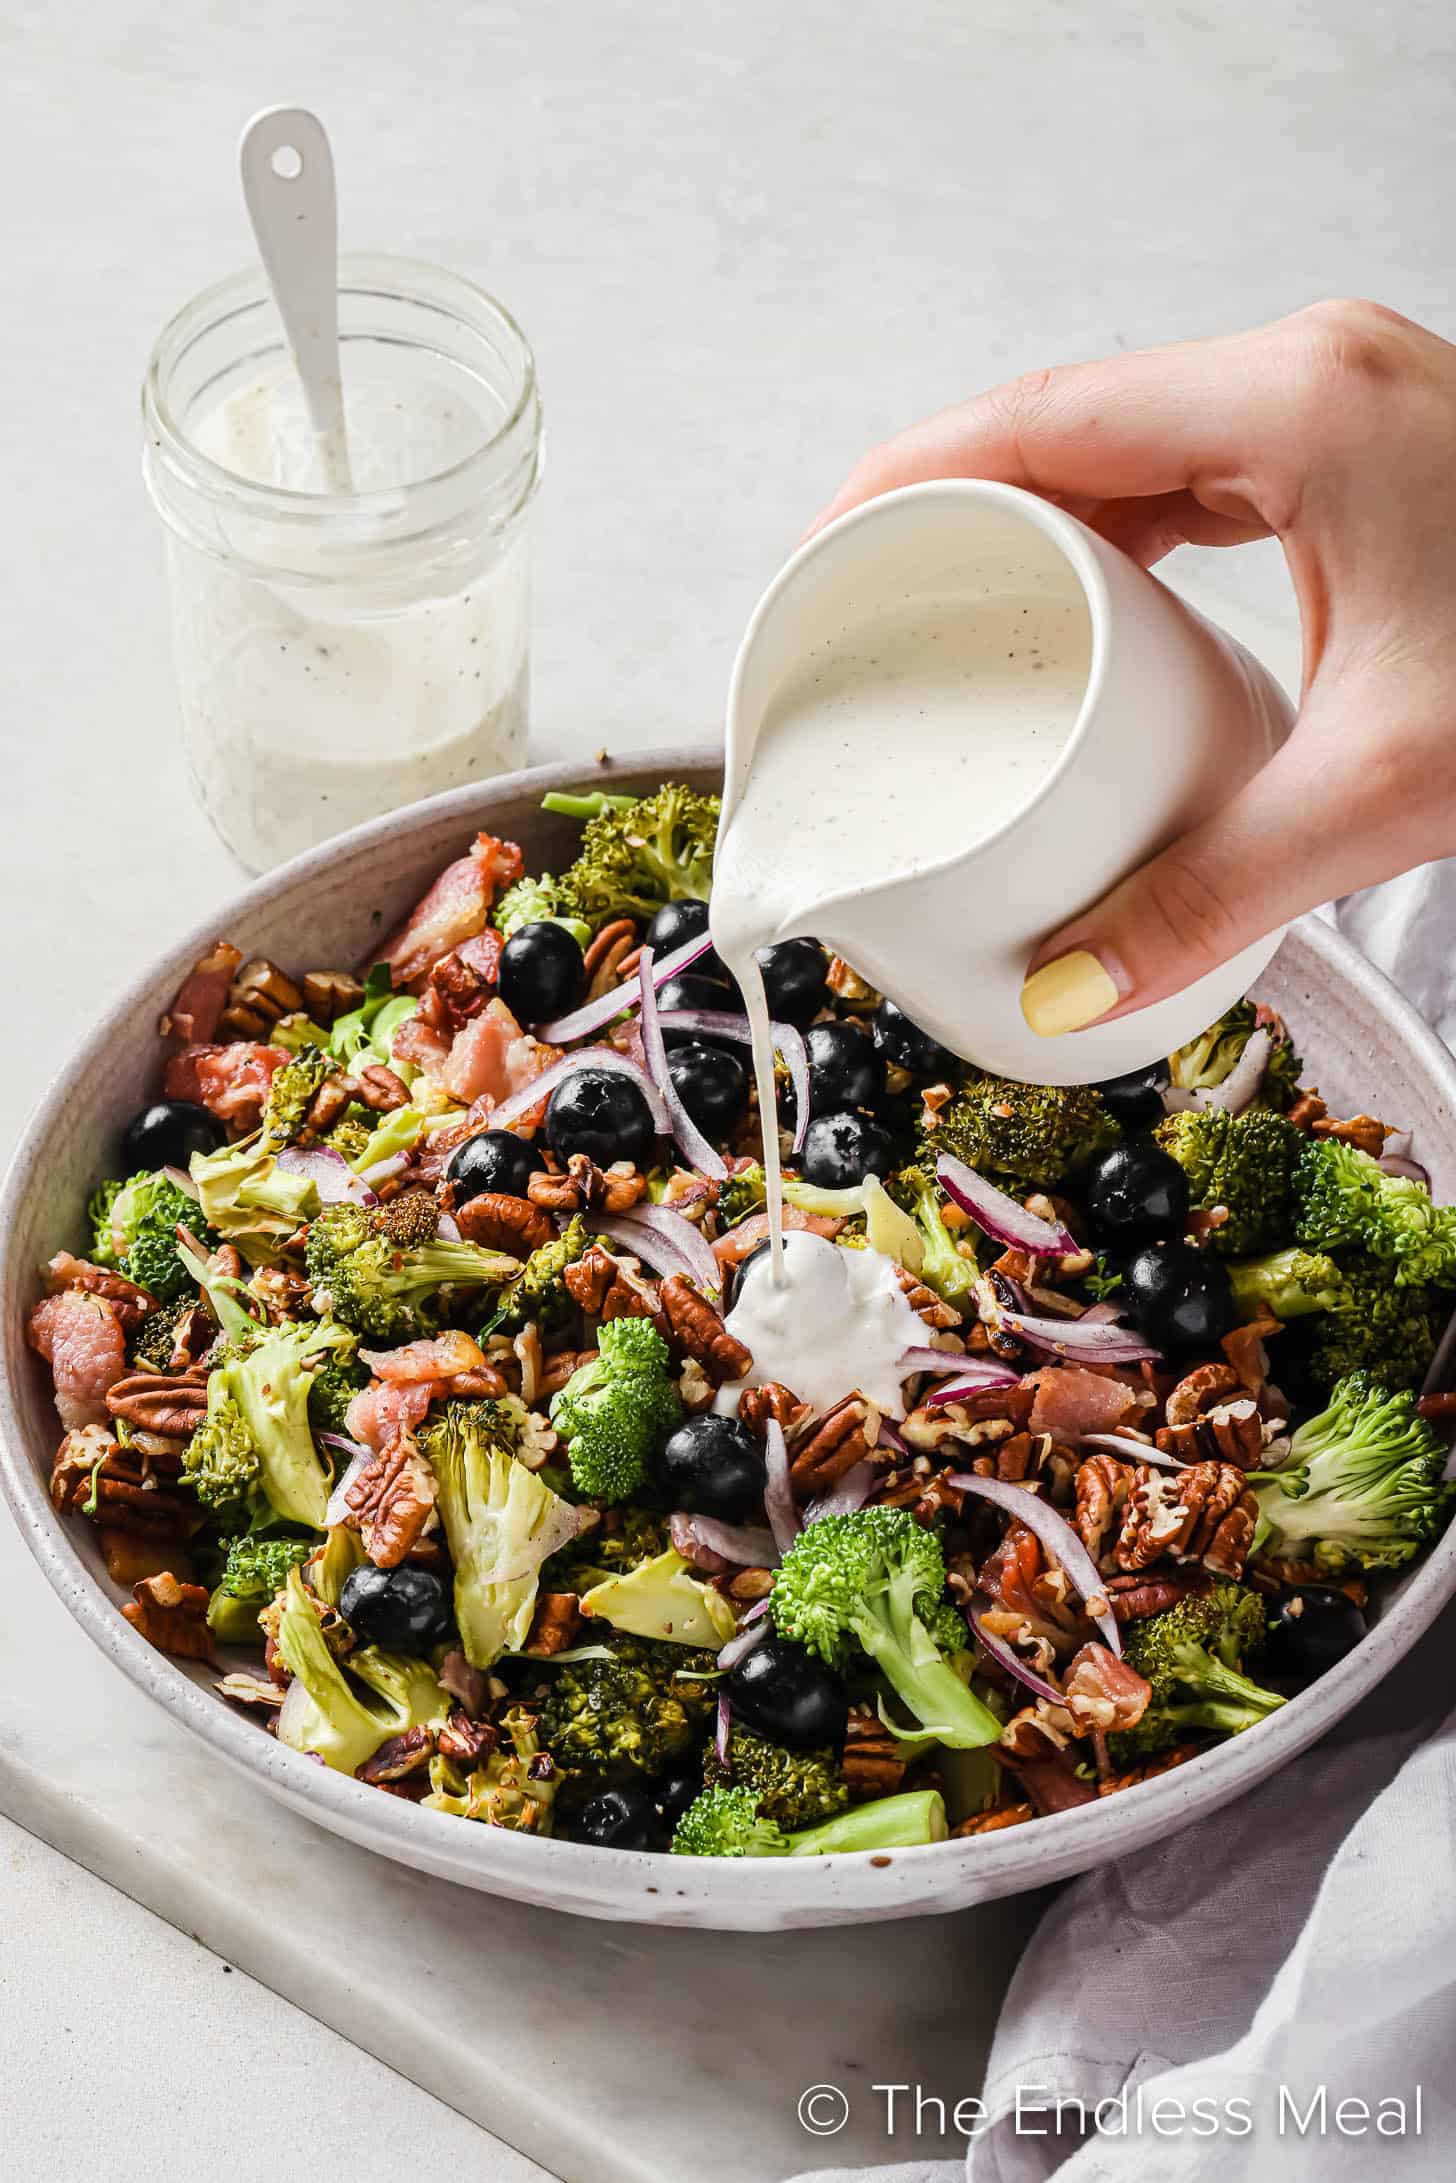 Pouring dressing over top of Blueberry Broccoli Salad